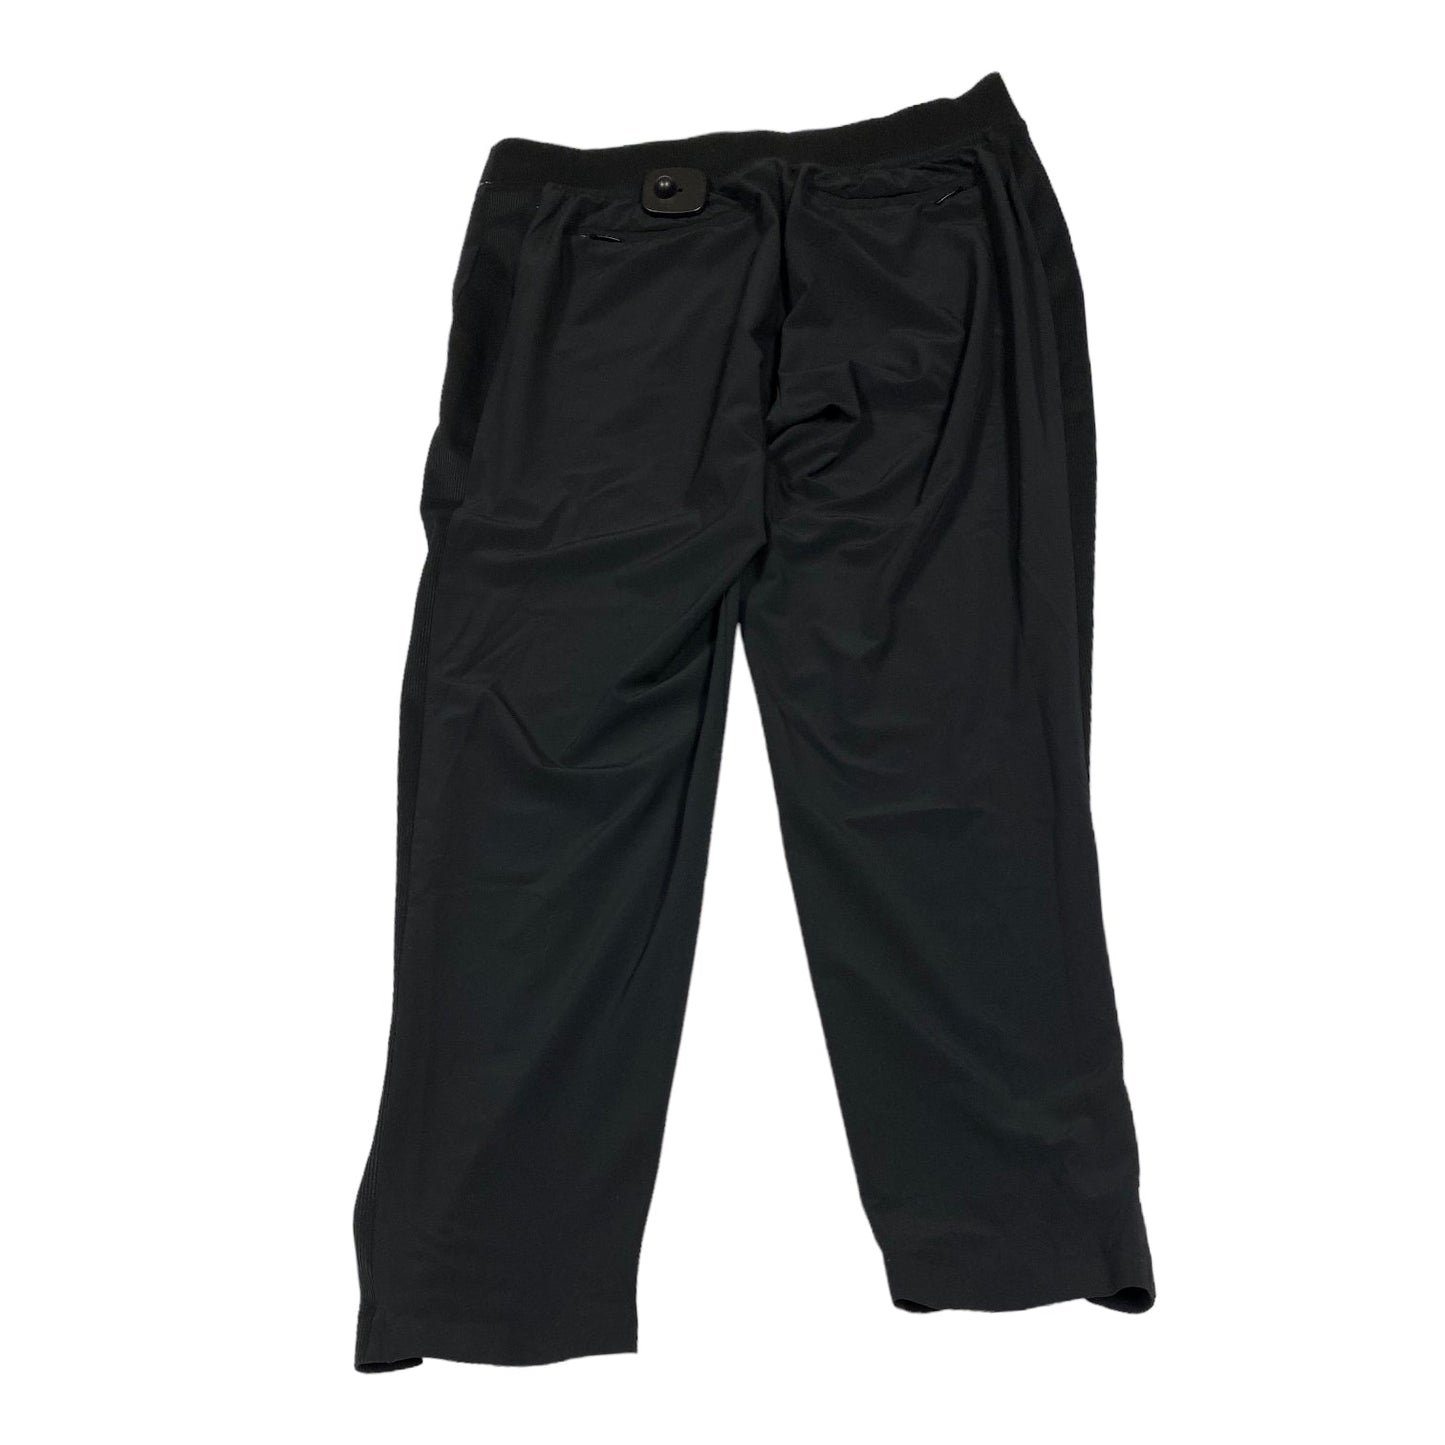 Athletic Pants By Athleta  Size: 10